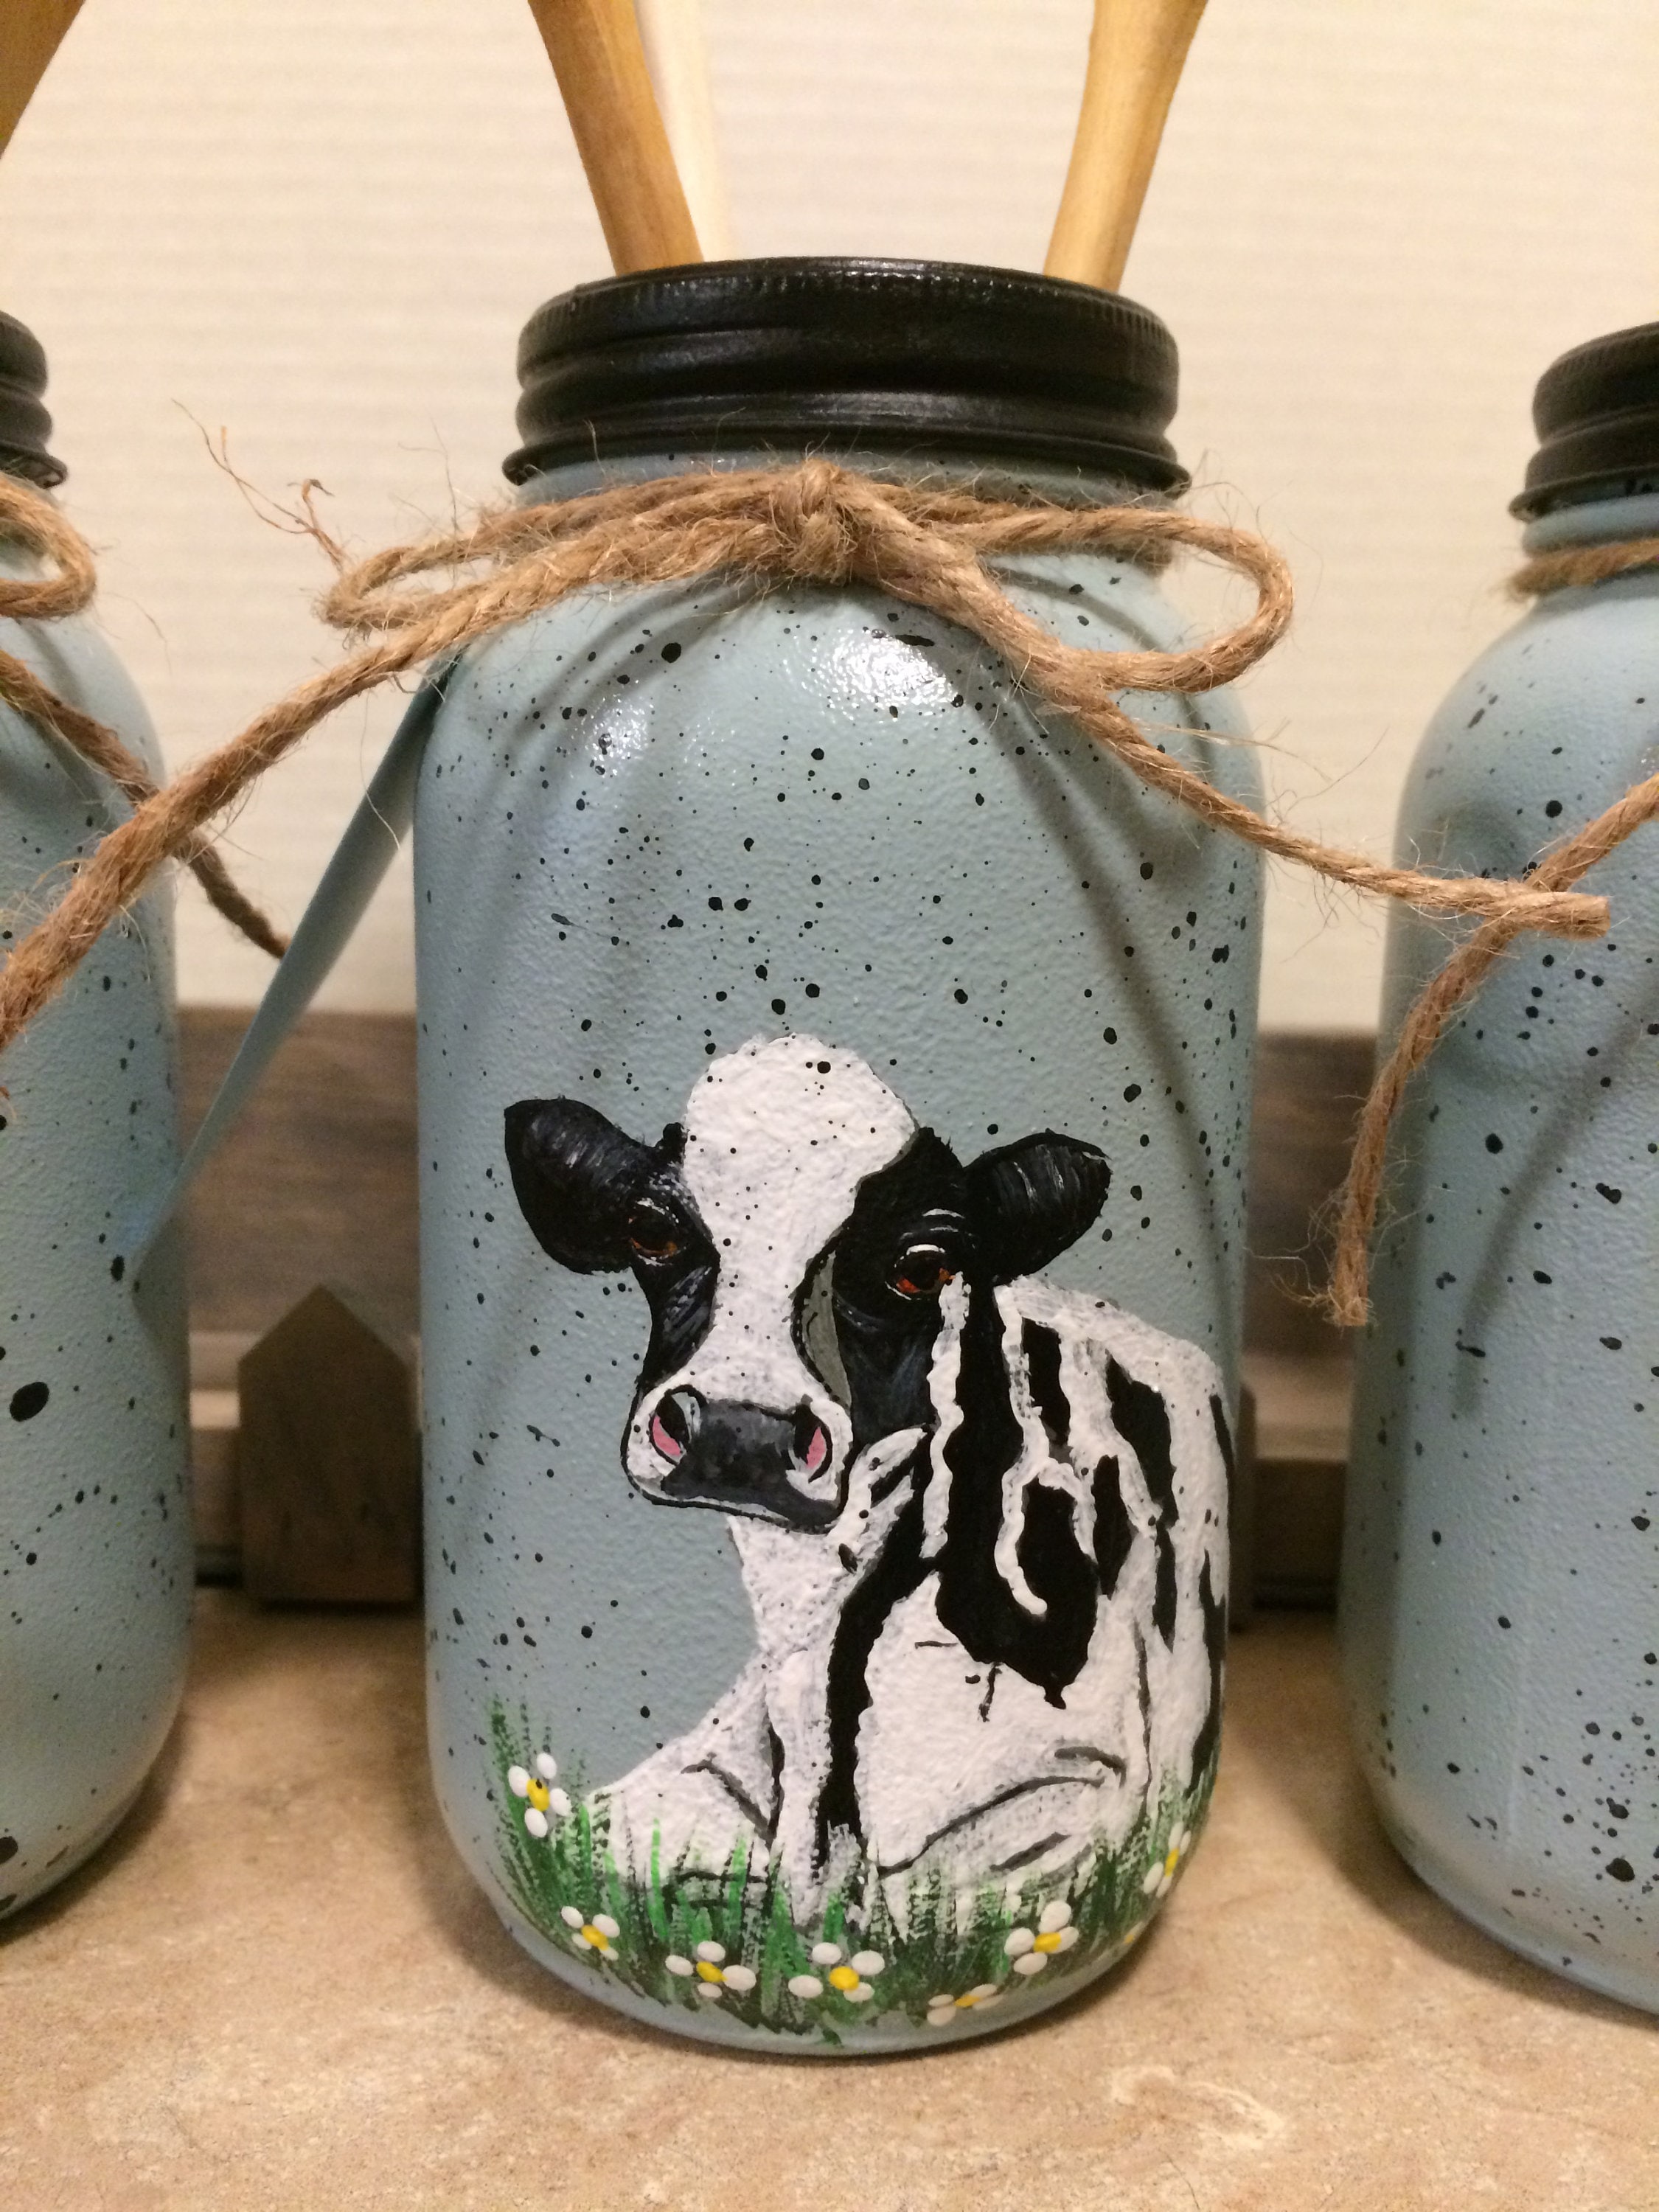 Modern Farmhouse Kitchen Decor With Cows for Simple Design